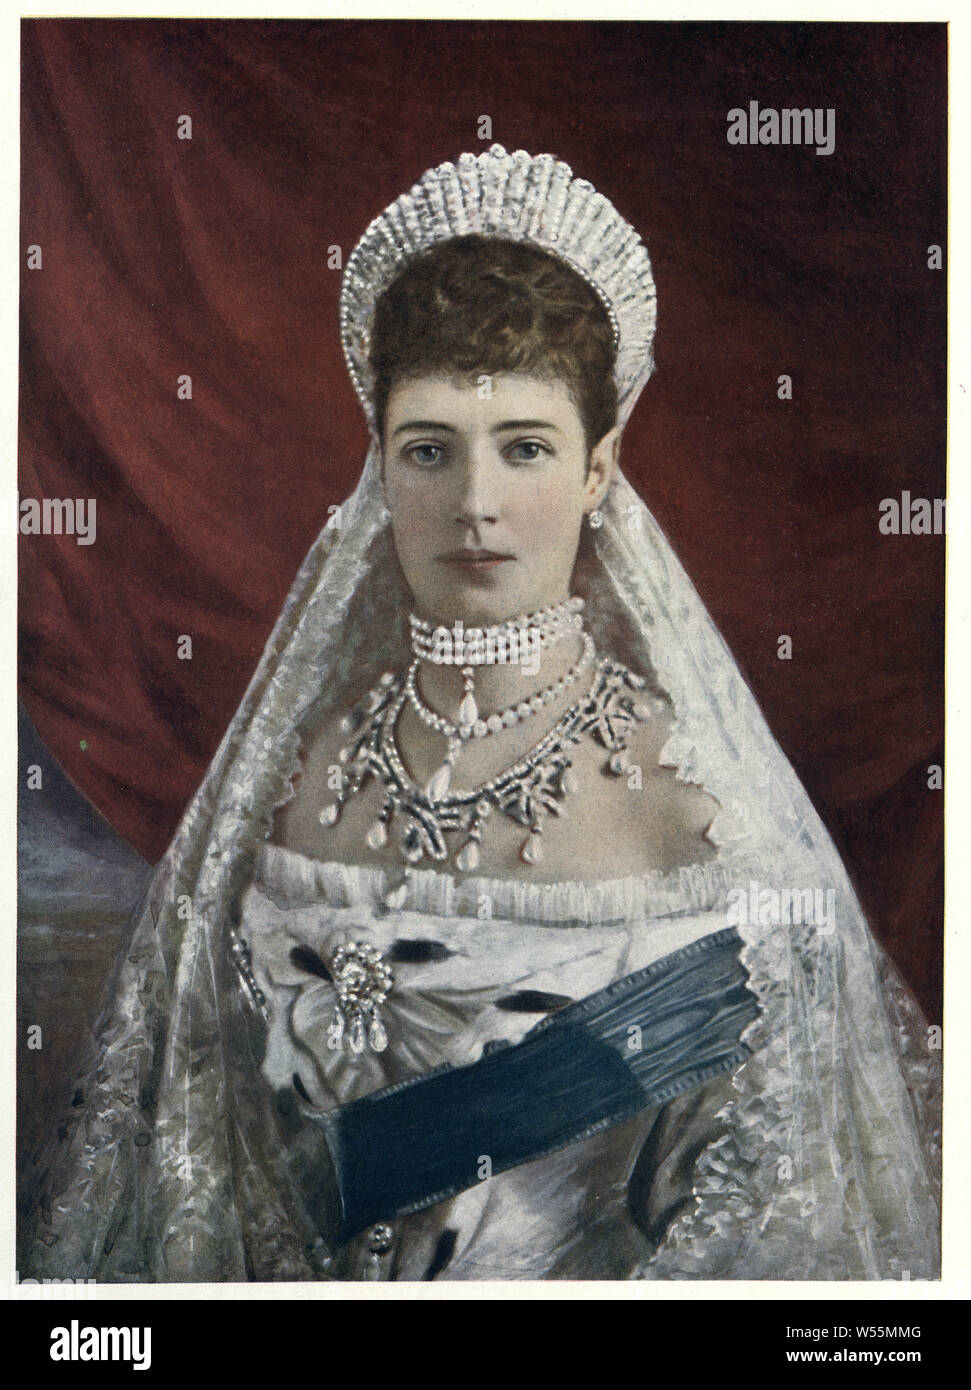 Maria Feodorovna (26 November 1847 – 13 October 1928), known before her marriage as Princess Dagmar of Denmark, was a Danish princess and Empress of Russia as spouse of Emperor Alexander III Stock Photo